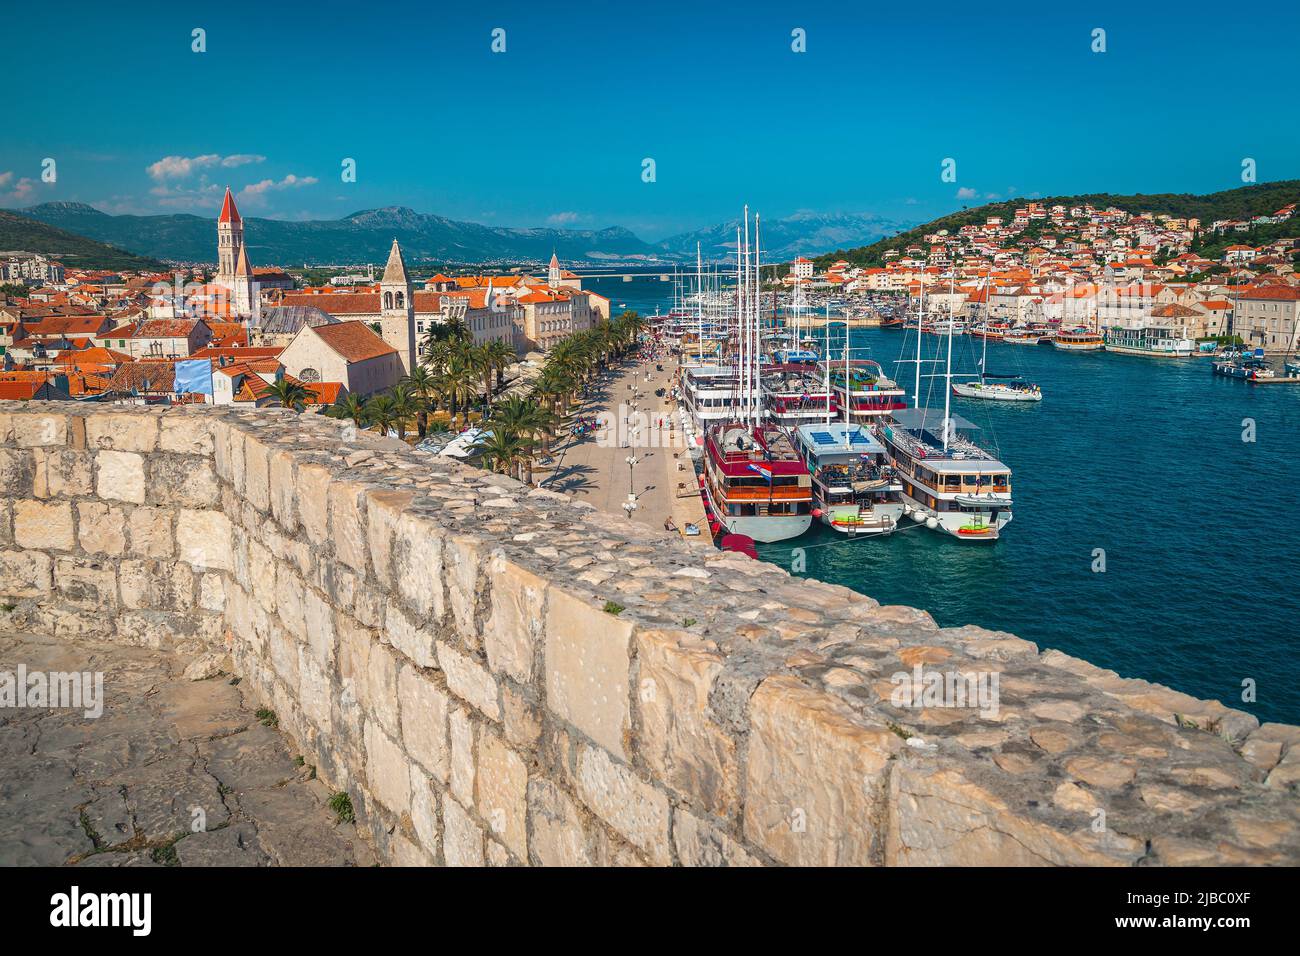 Great touristic location and beautiful view from the Kamerlengo castle. Walkway with palm trees, cozy street cafes and restaurants. Anchored boats and Stock Photo